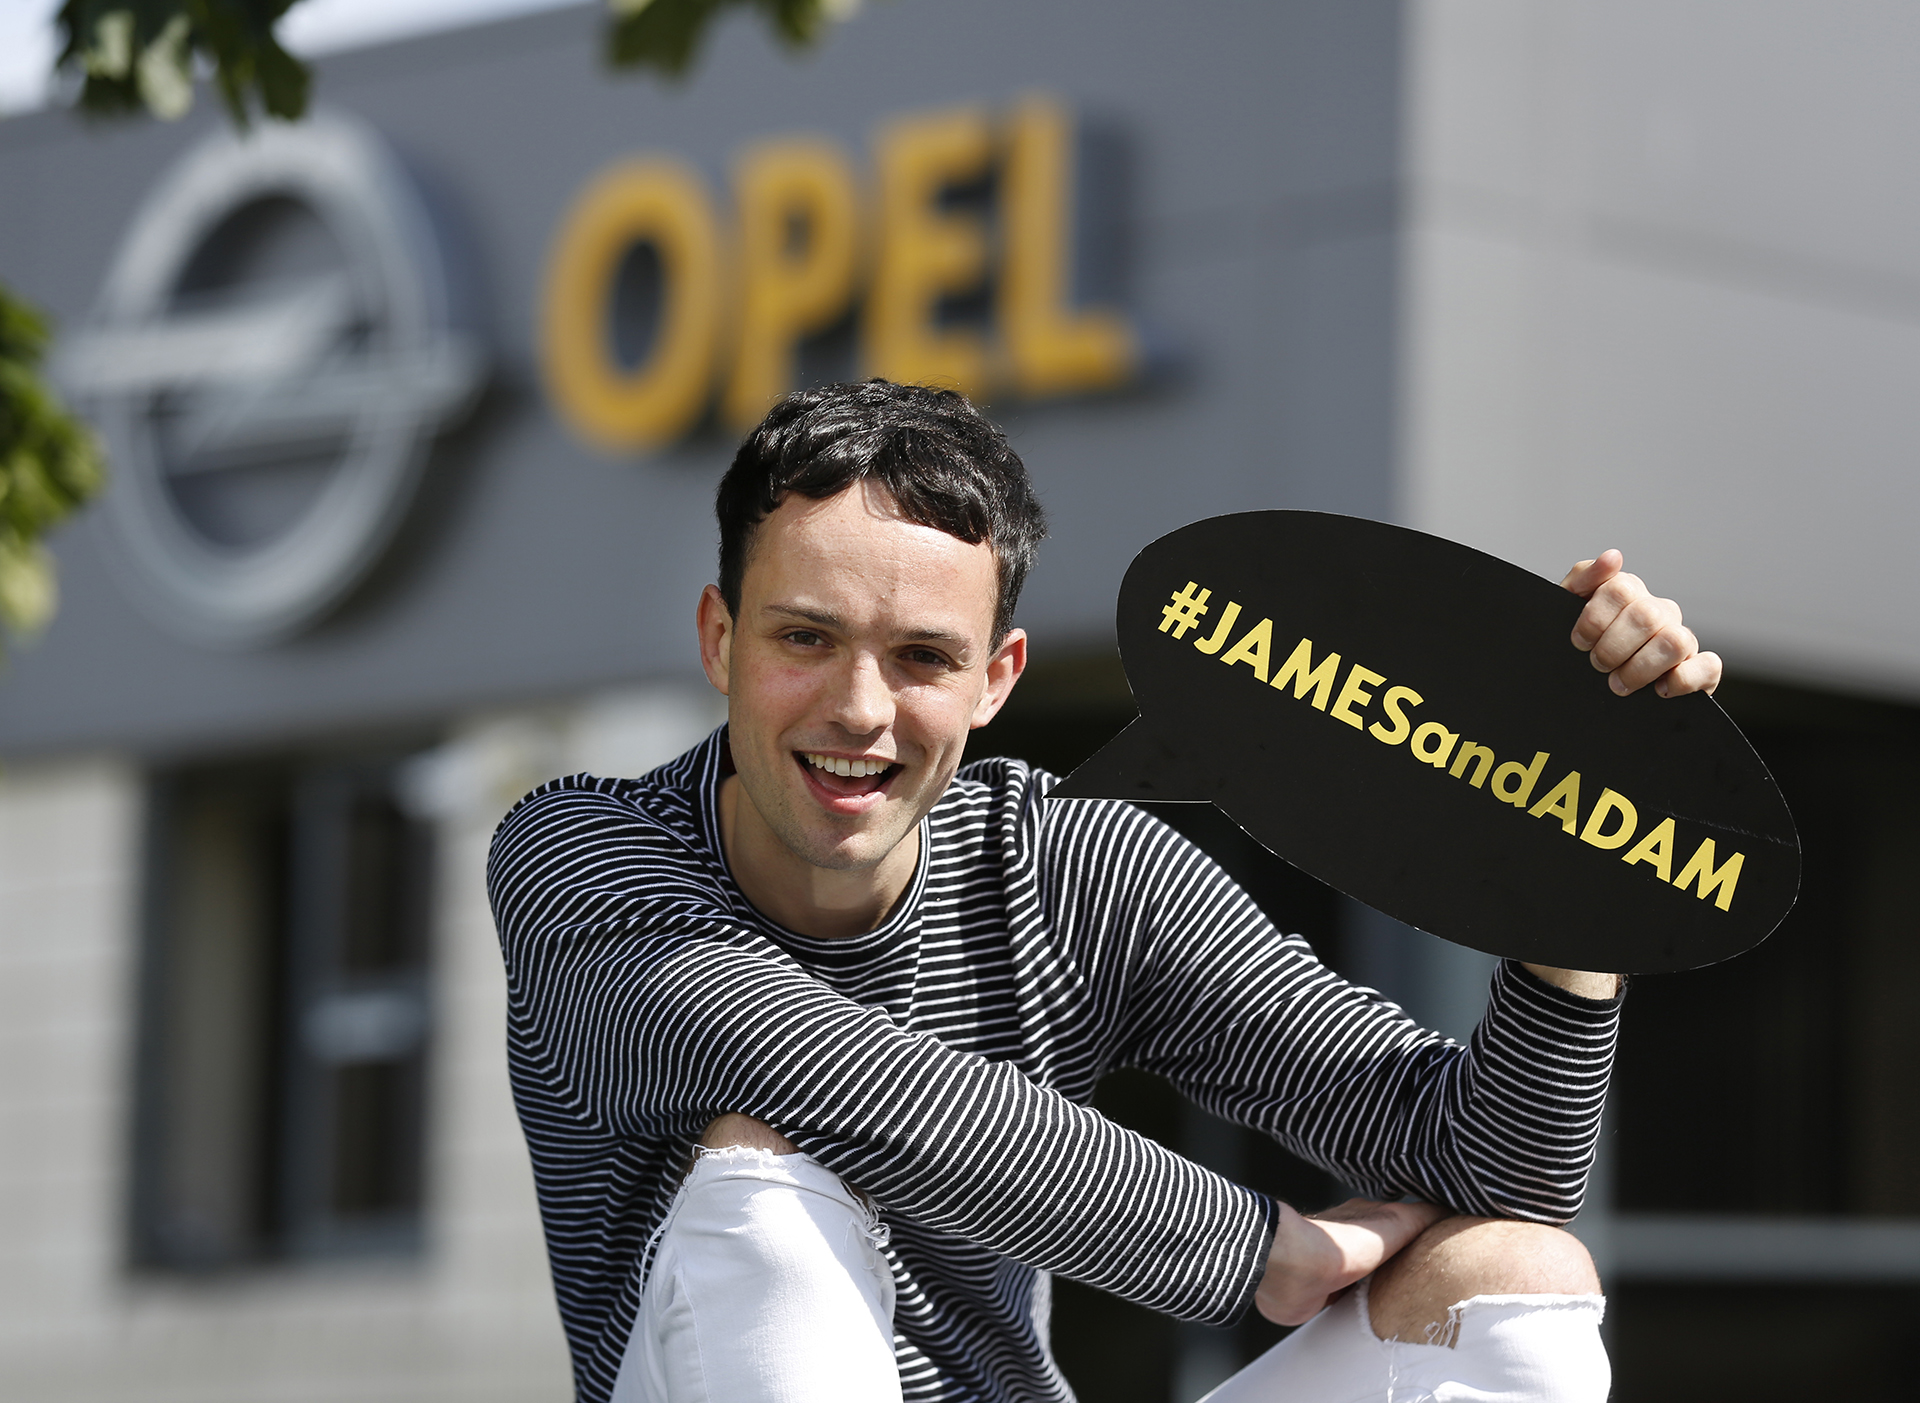 James Kavanagh Learns to Cycle with Opel Ireland – GOTCHA!